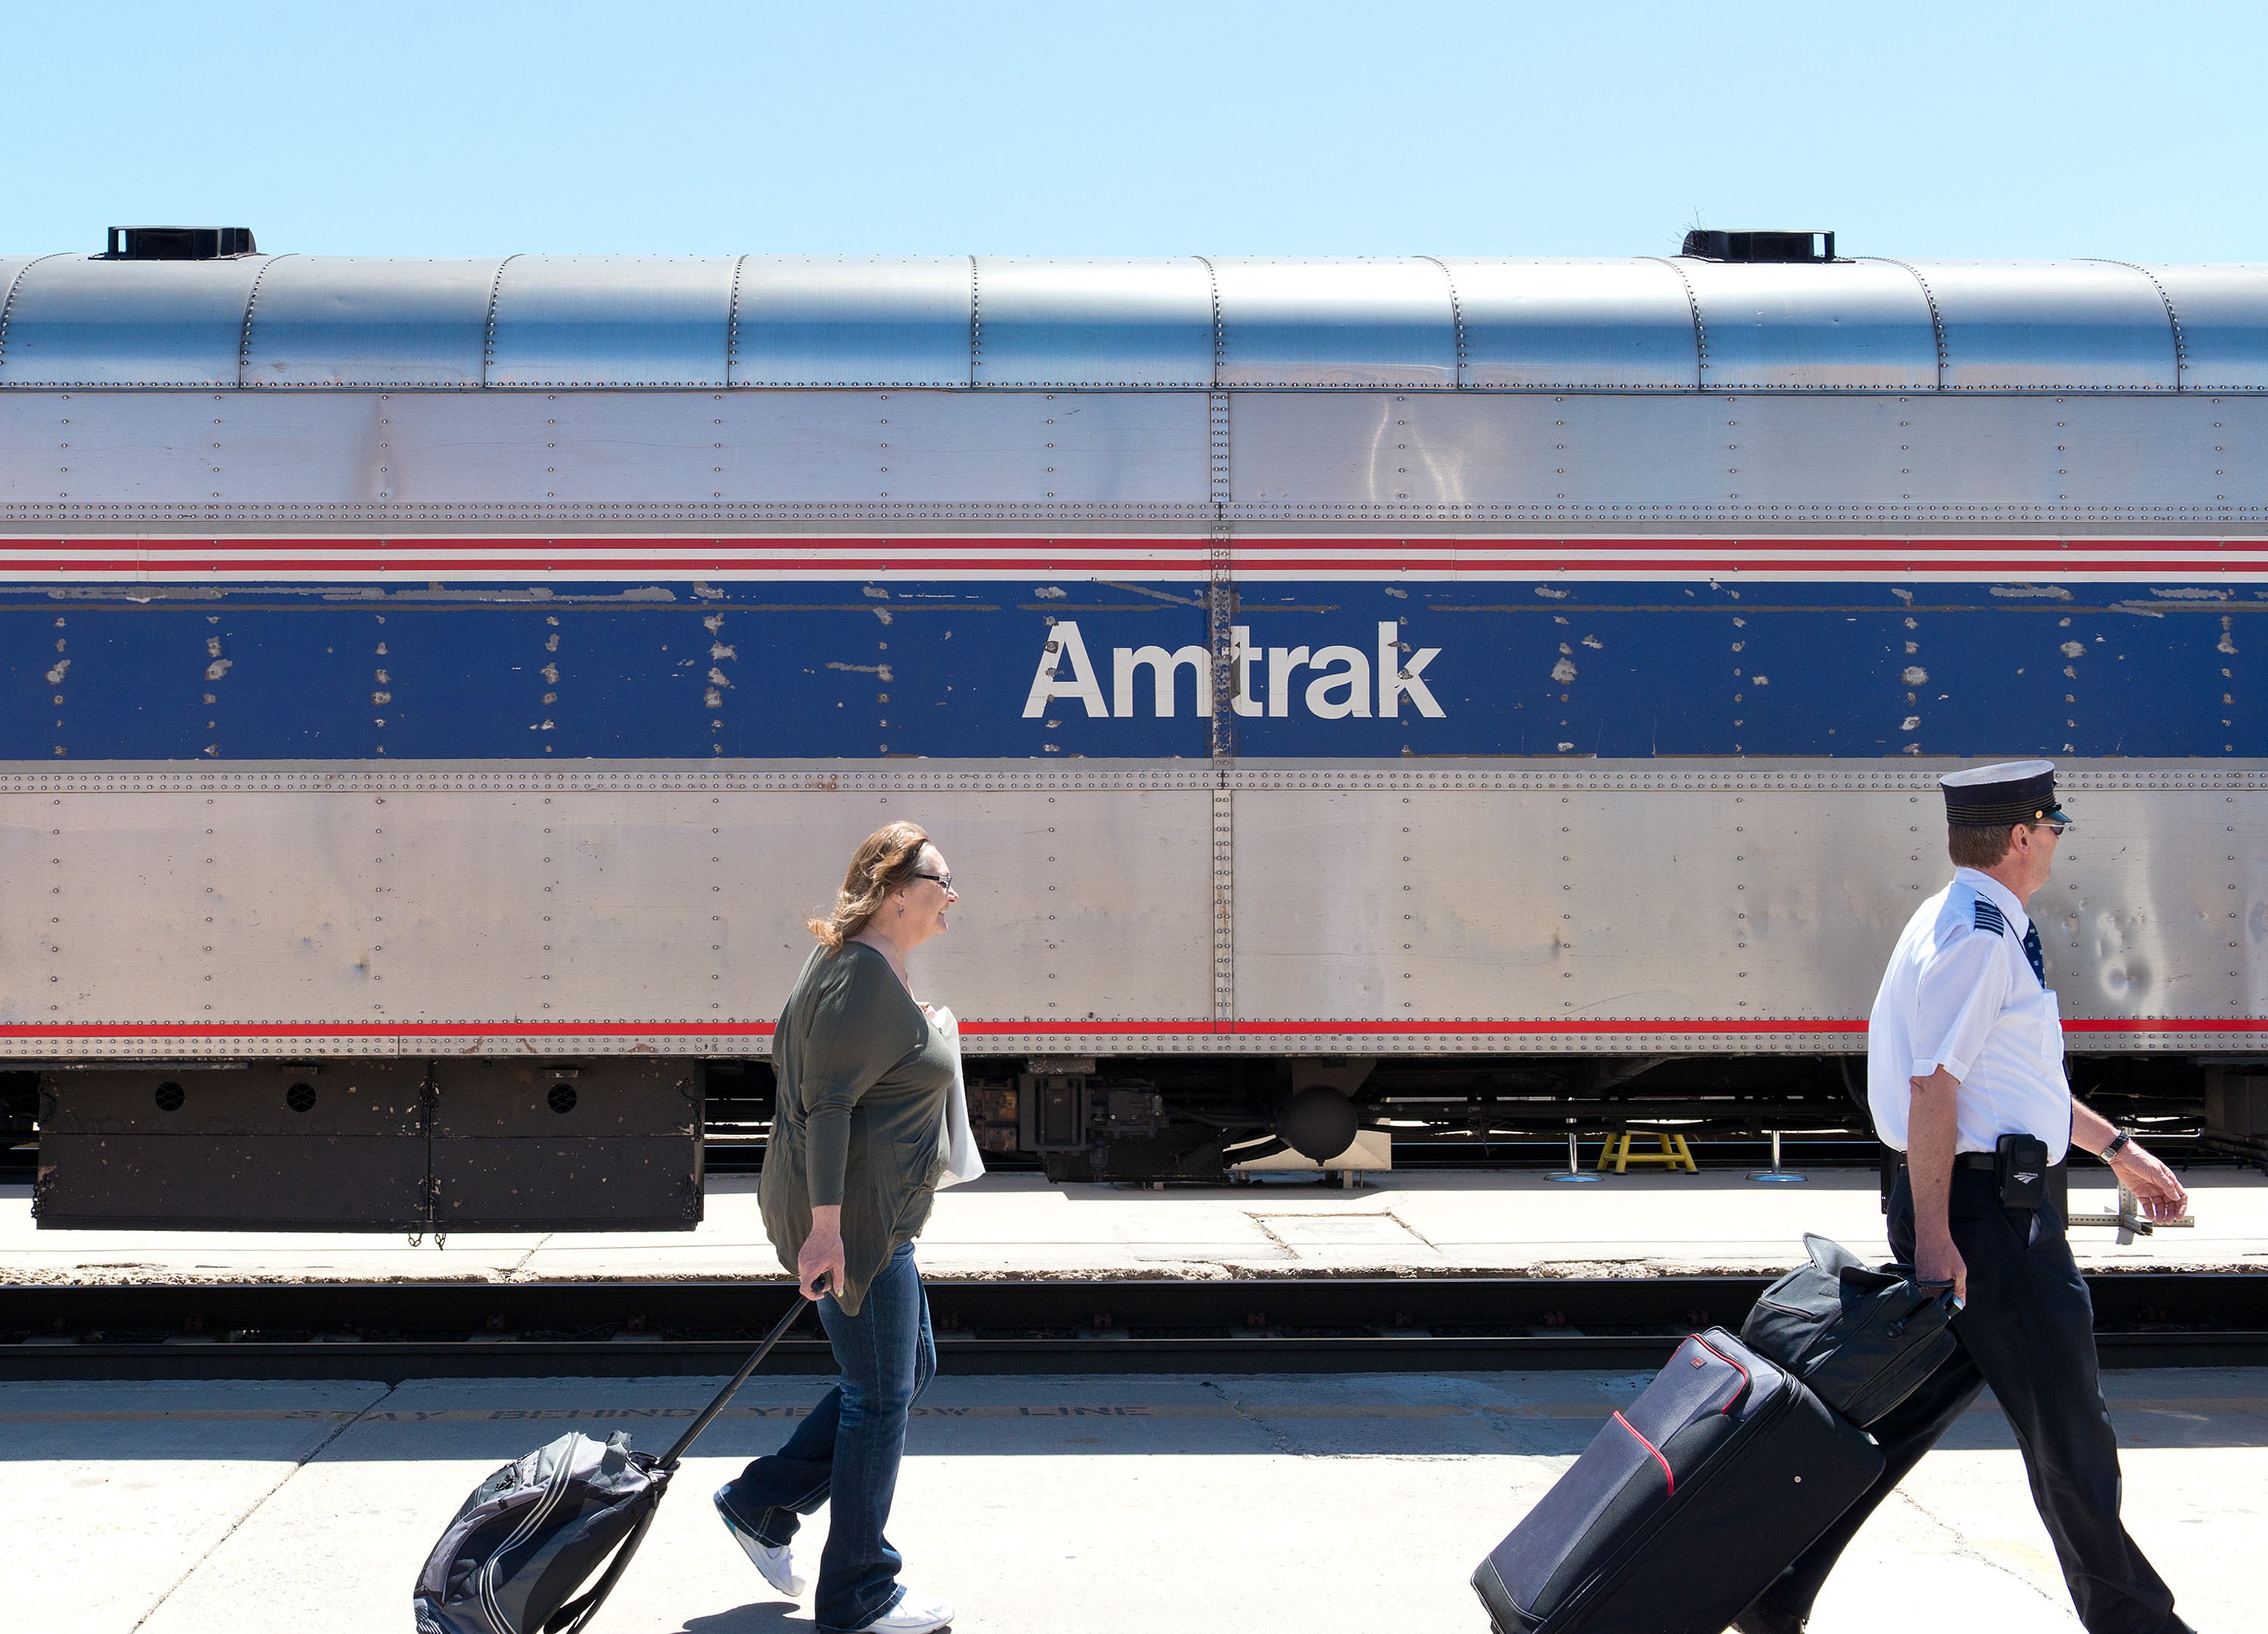 How to Book Train Travel from St. Louis to Chicago | eHow